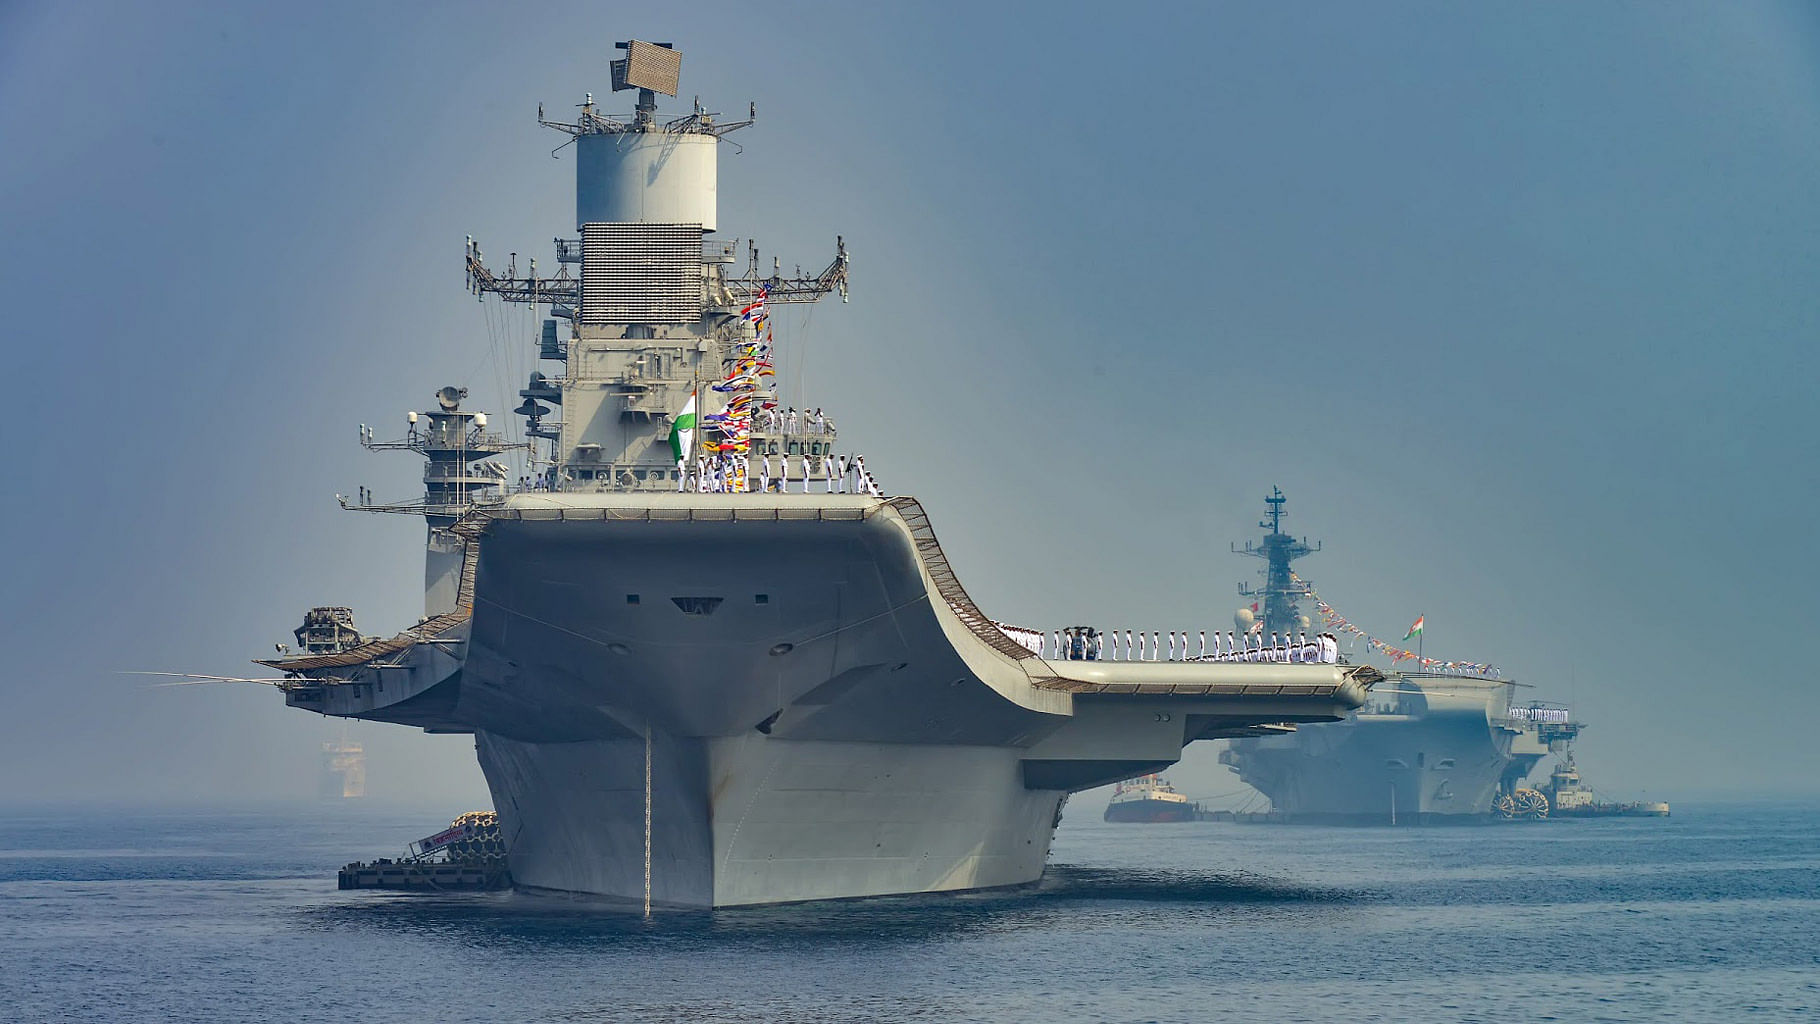 One of the aircraft carriers at the IFR 2016. (Photo: <a href="https://ifr16.indiannavy.gov.in/photo-gallery.htm#nanogallery/nanoGallery/6247708126361057393">International Fleet Review</a>)